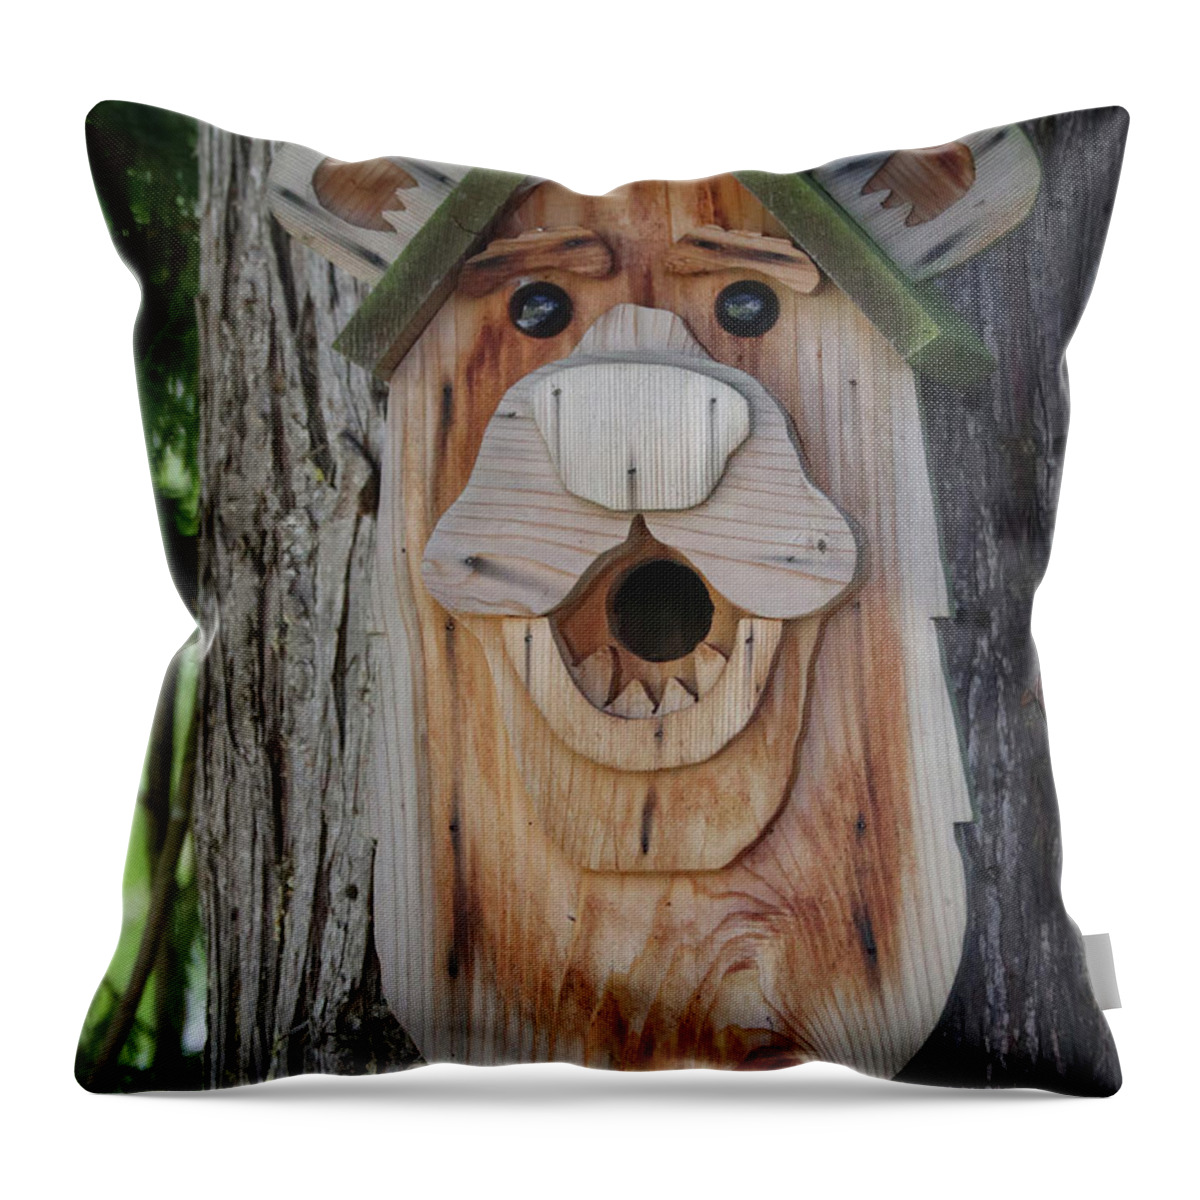 Dog Throw Pillow featuring the photograph Security Dog by D Lee